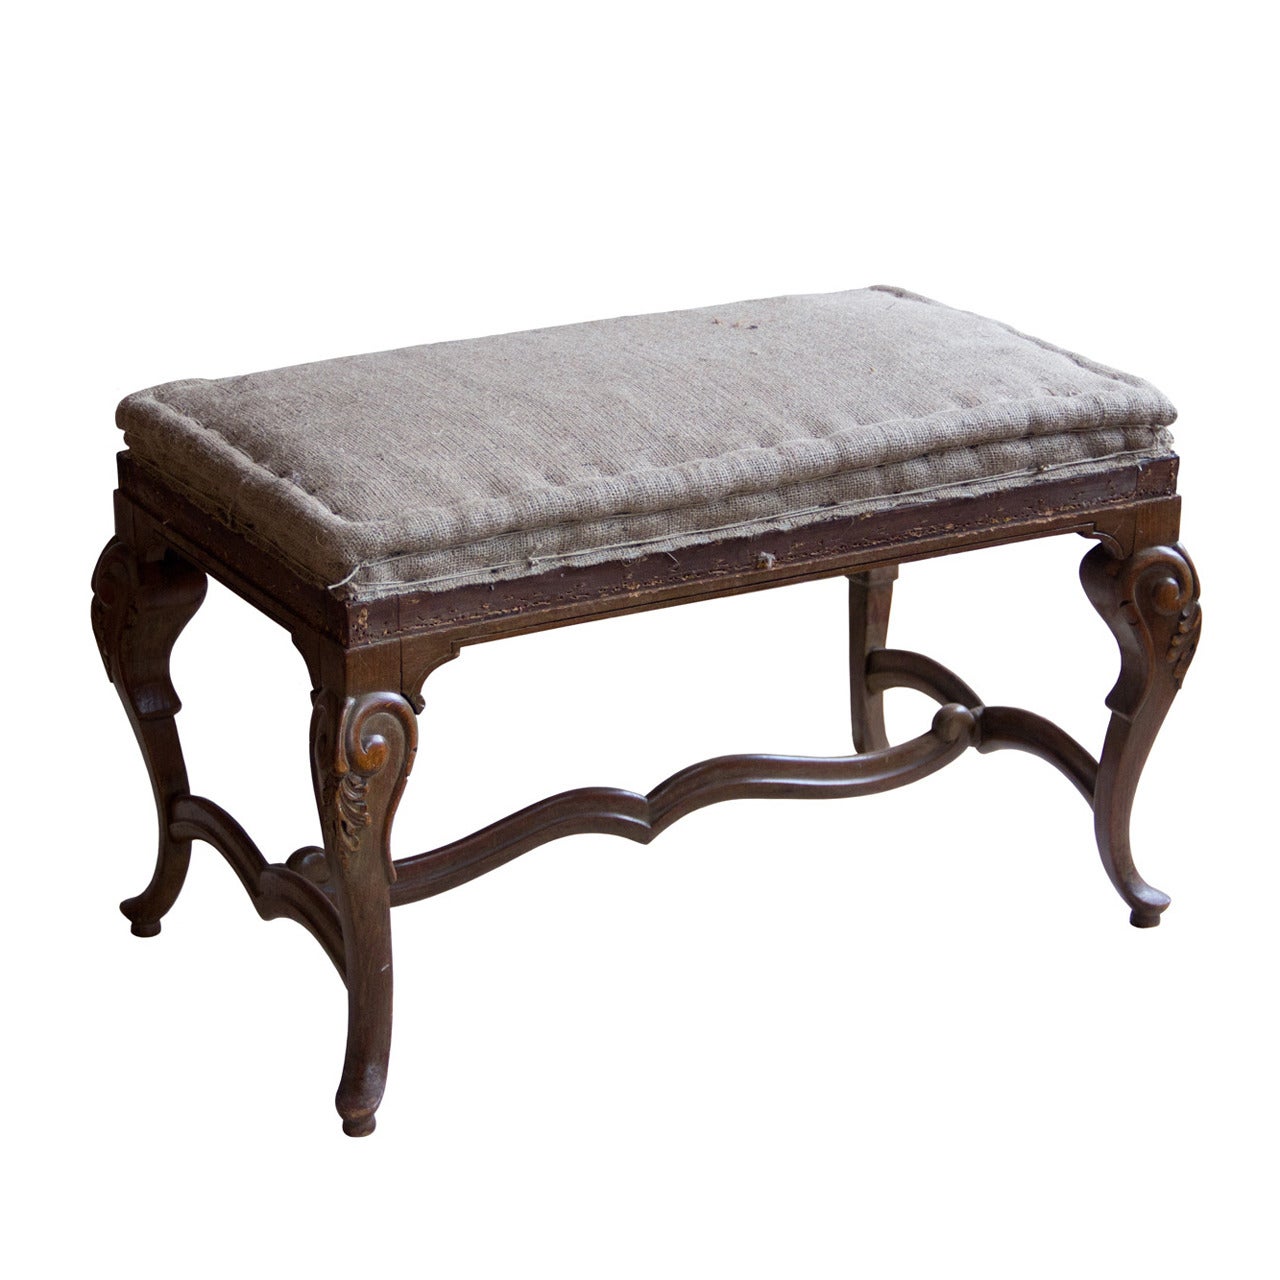 19th Century French Louis XV Style Stool